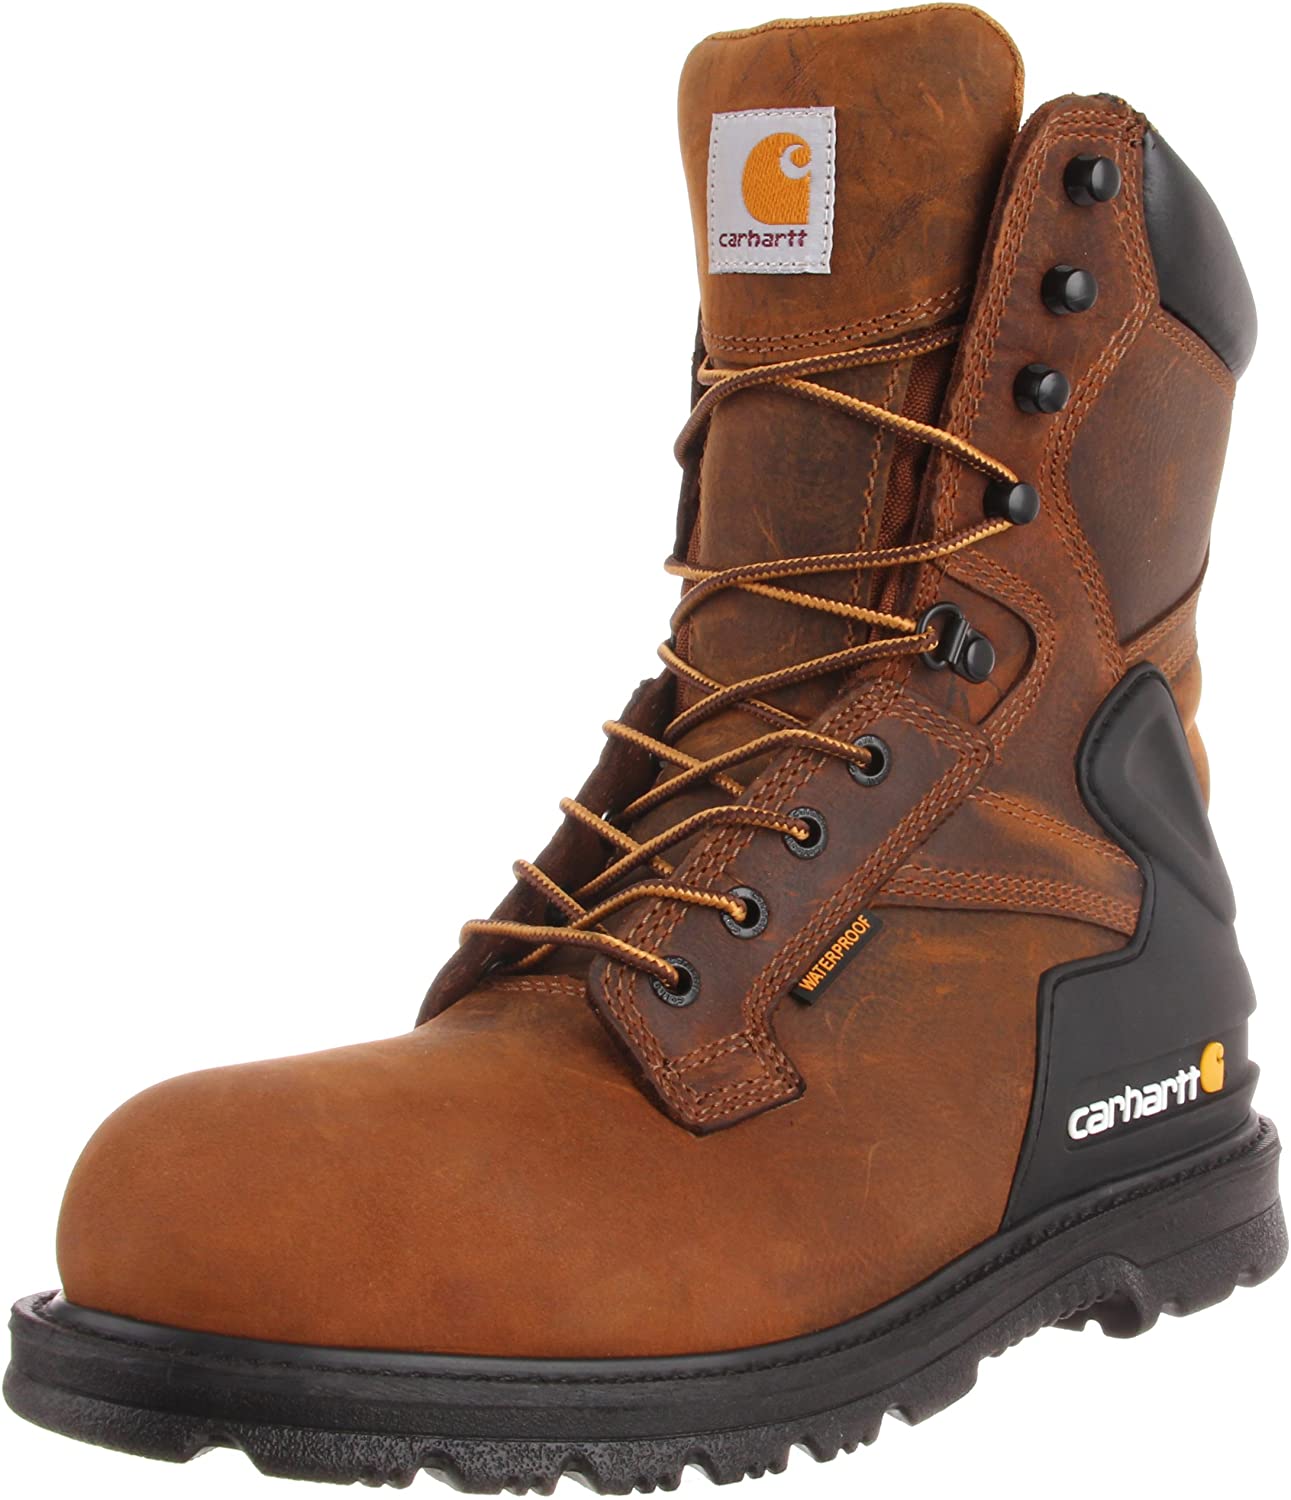 Things to Consider When Buying Quality Boots for Outdoors